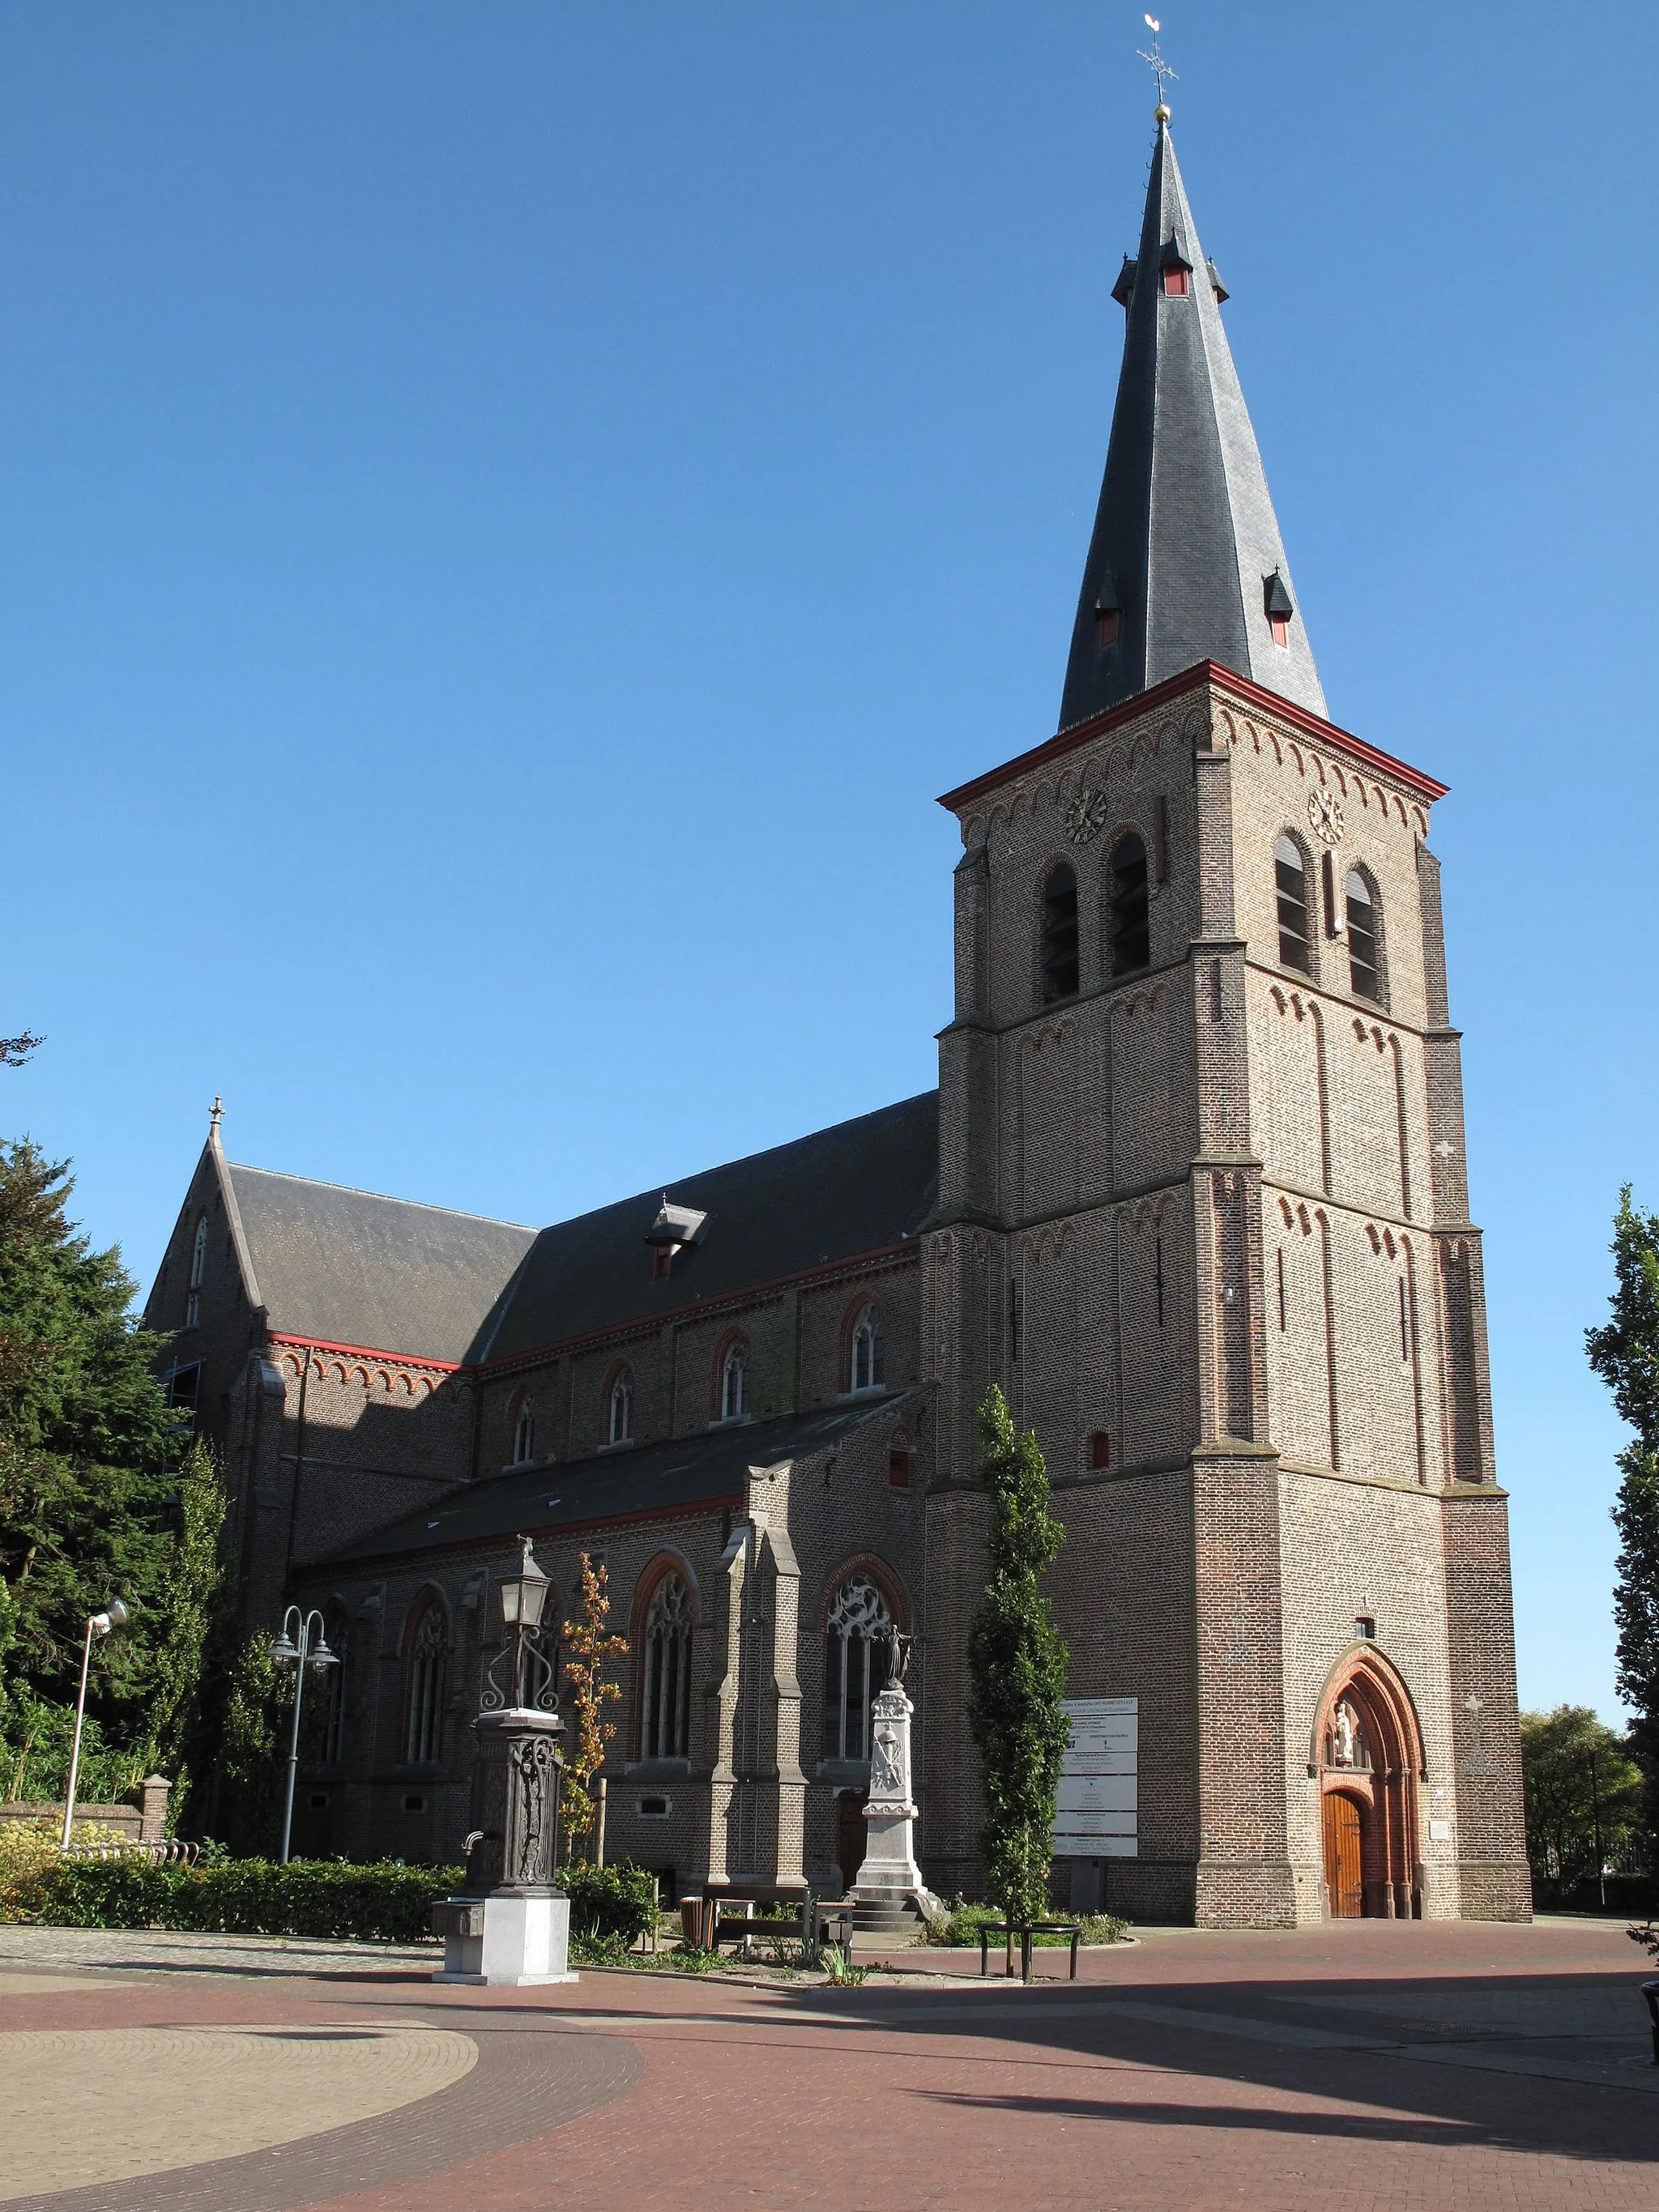 Image of Sint-Huibrechts-Lille